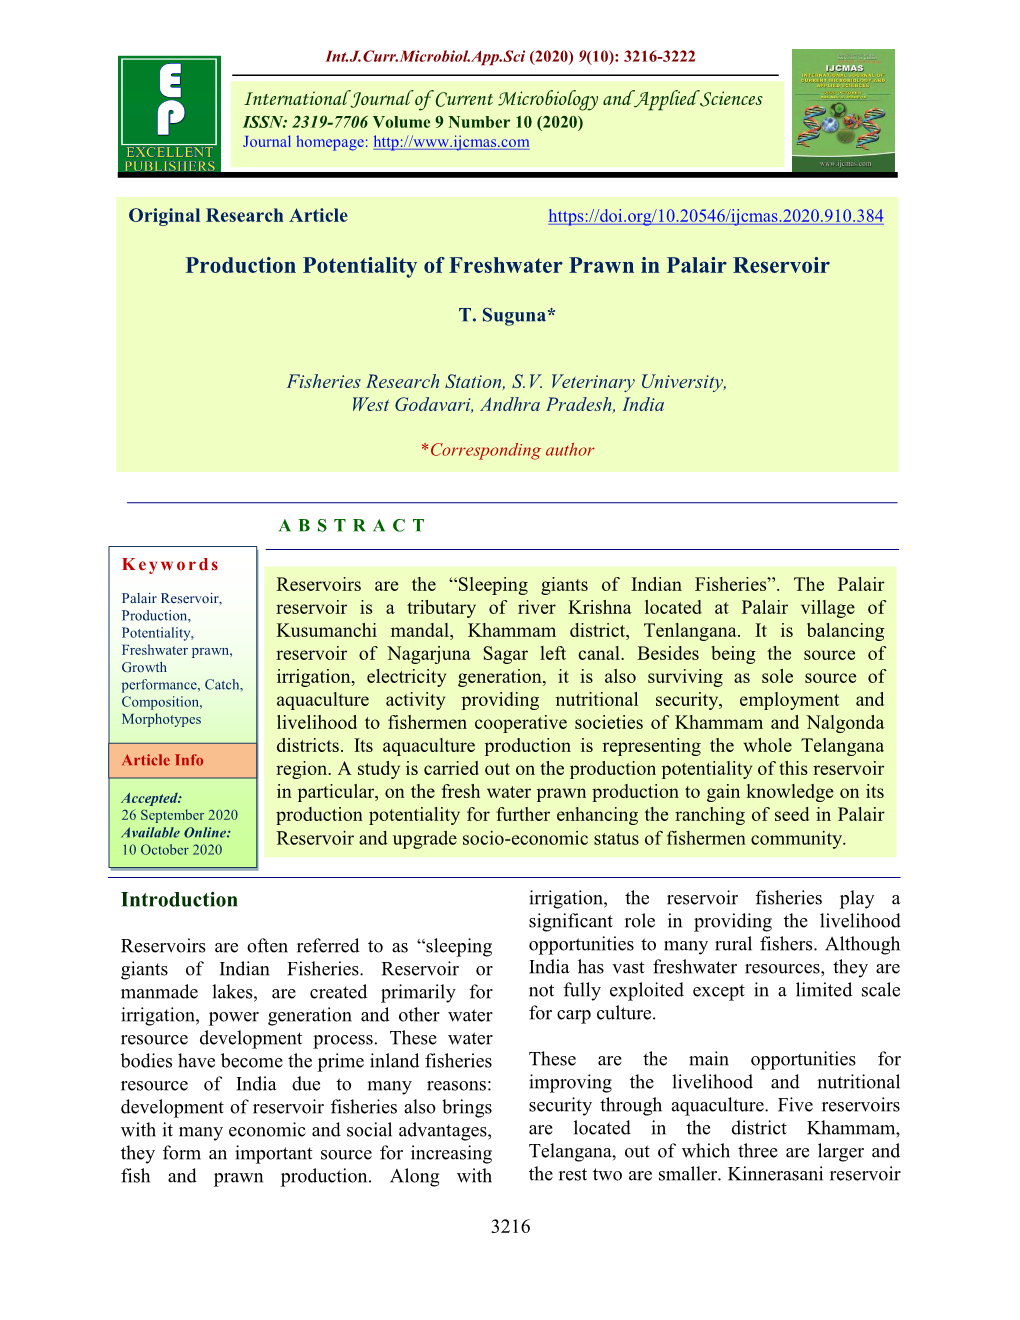 Production Potentiality of Freshwater Prawn in Palair Reservoir